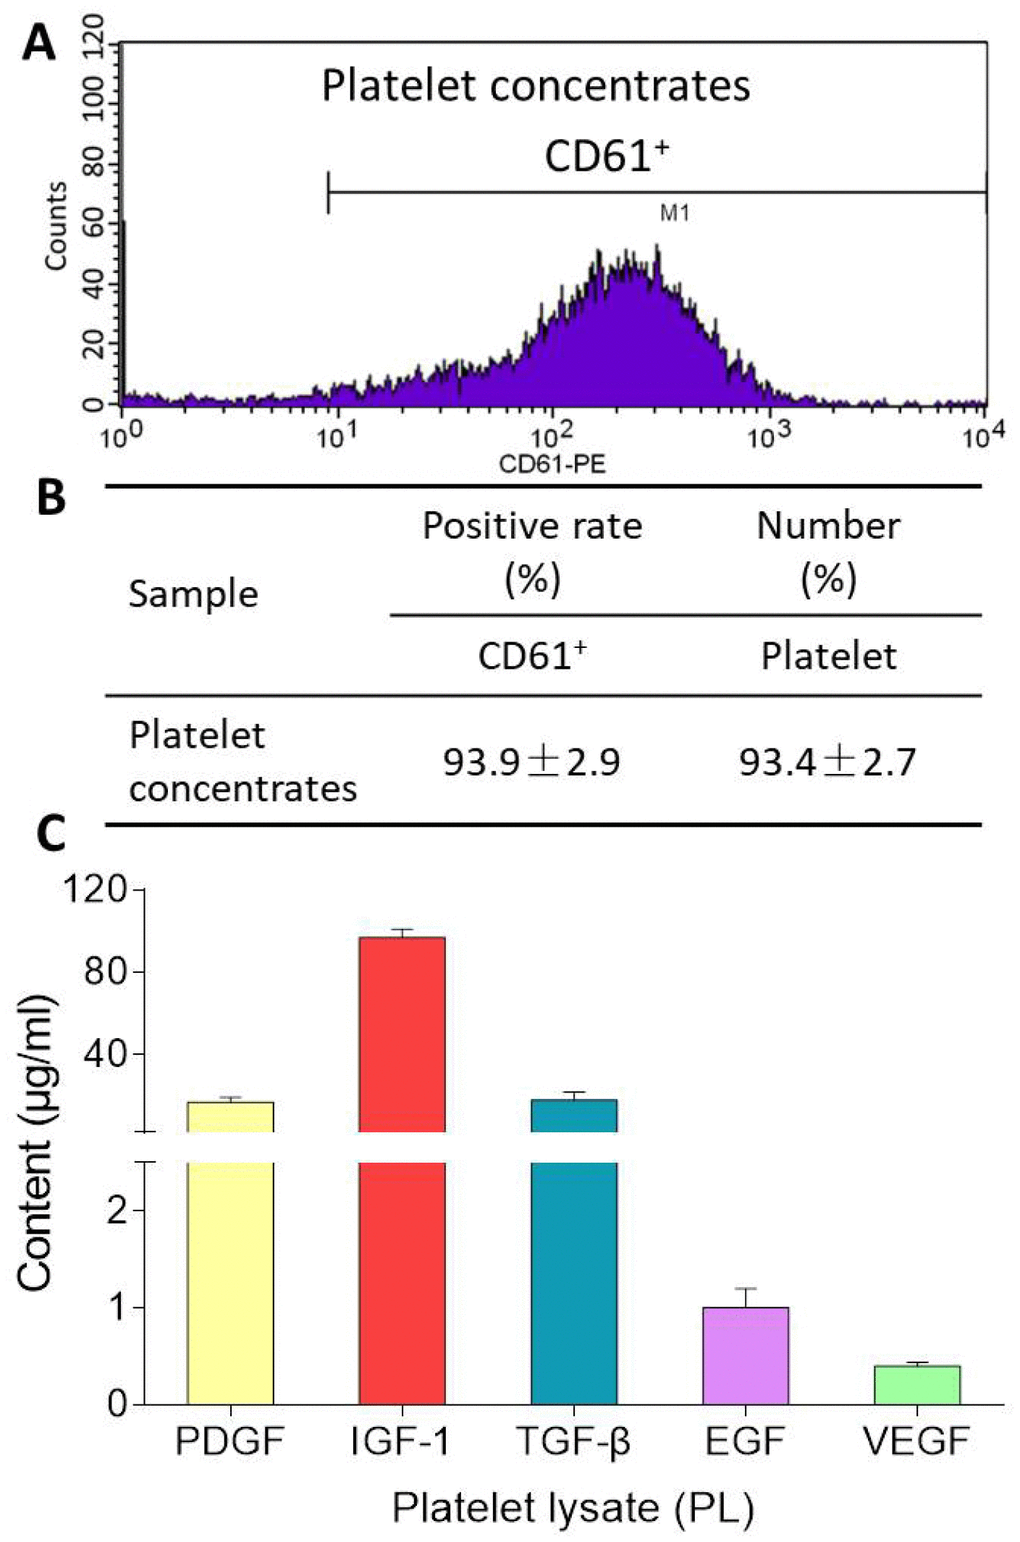 Flow cytometry pattern of platelet concentrates (A), CD61-positive rate and platelet number of platelet concentrates (B), and contents of PDGF, IGF-1, TGF-β, EGF, VEGF in PL (C). Values are presented as mean ± SD, n = 3.